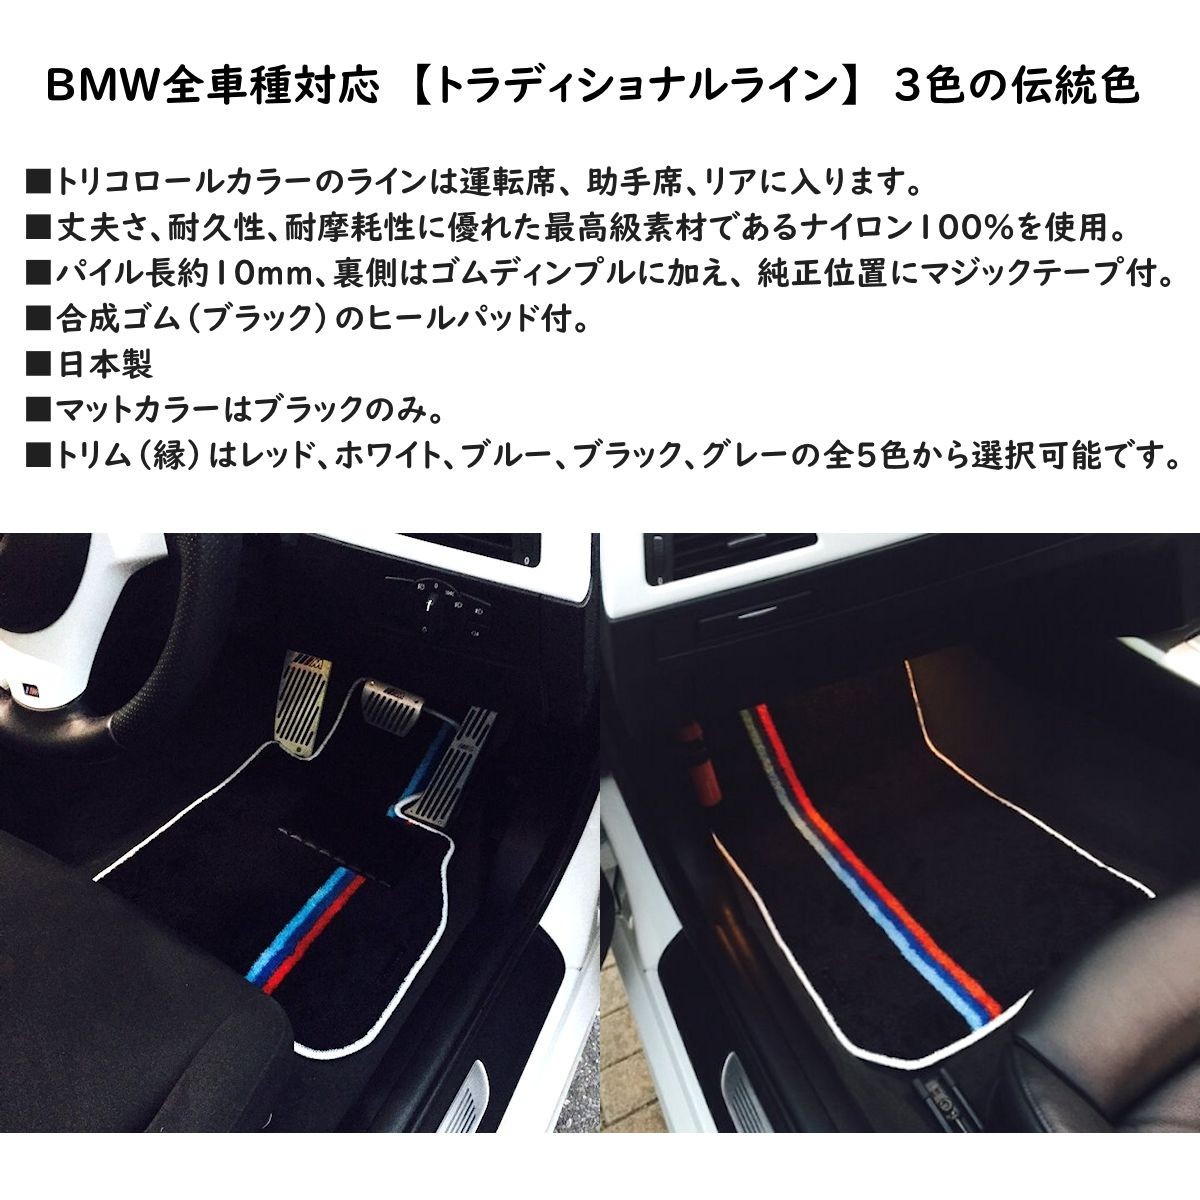 BMW 5 series sedan touring E39 special floor mat Precious ef custom-made made in Japan build-to-order manufacturing 2 sheets /4 pieces set 